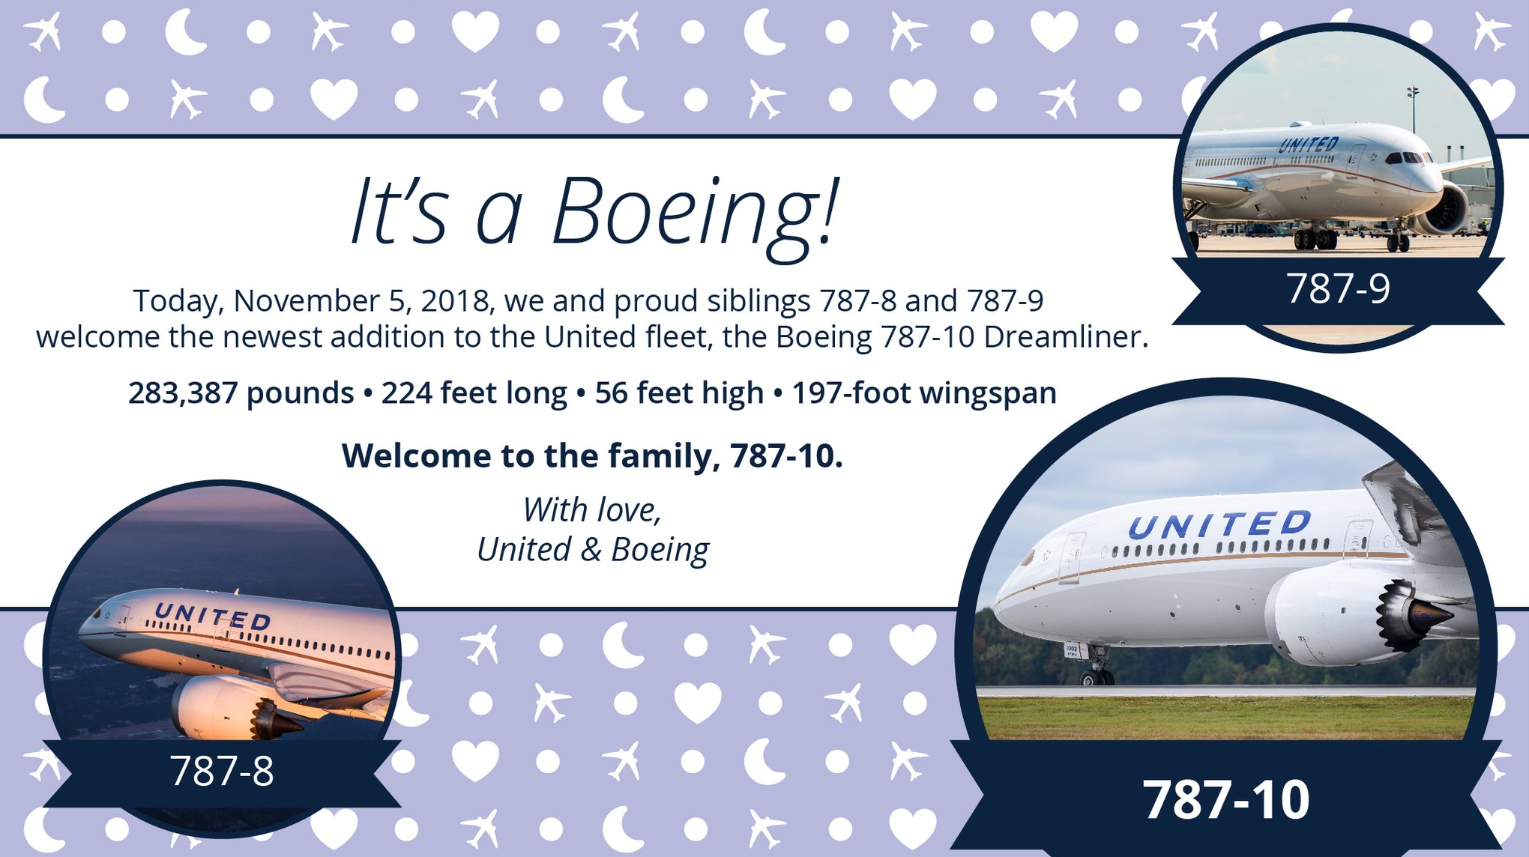 United Airlines takes delivery of their first Boeing 787-10